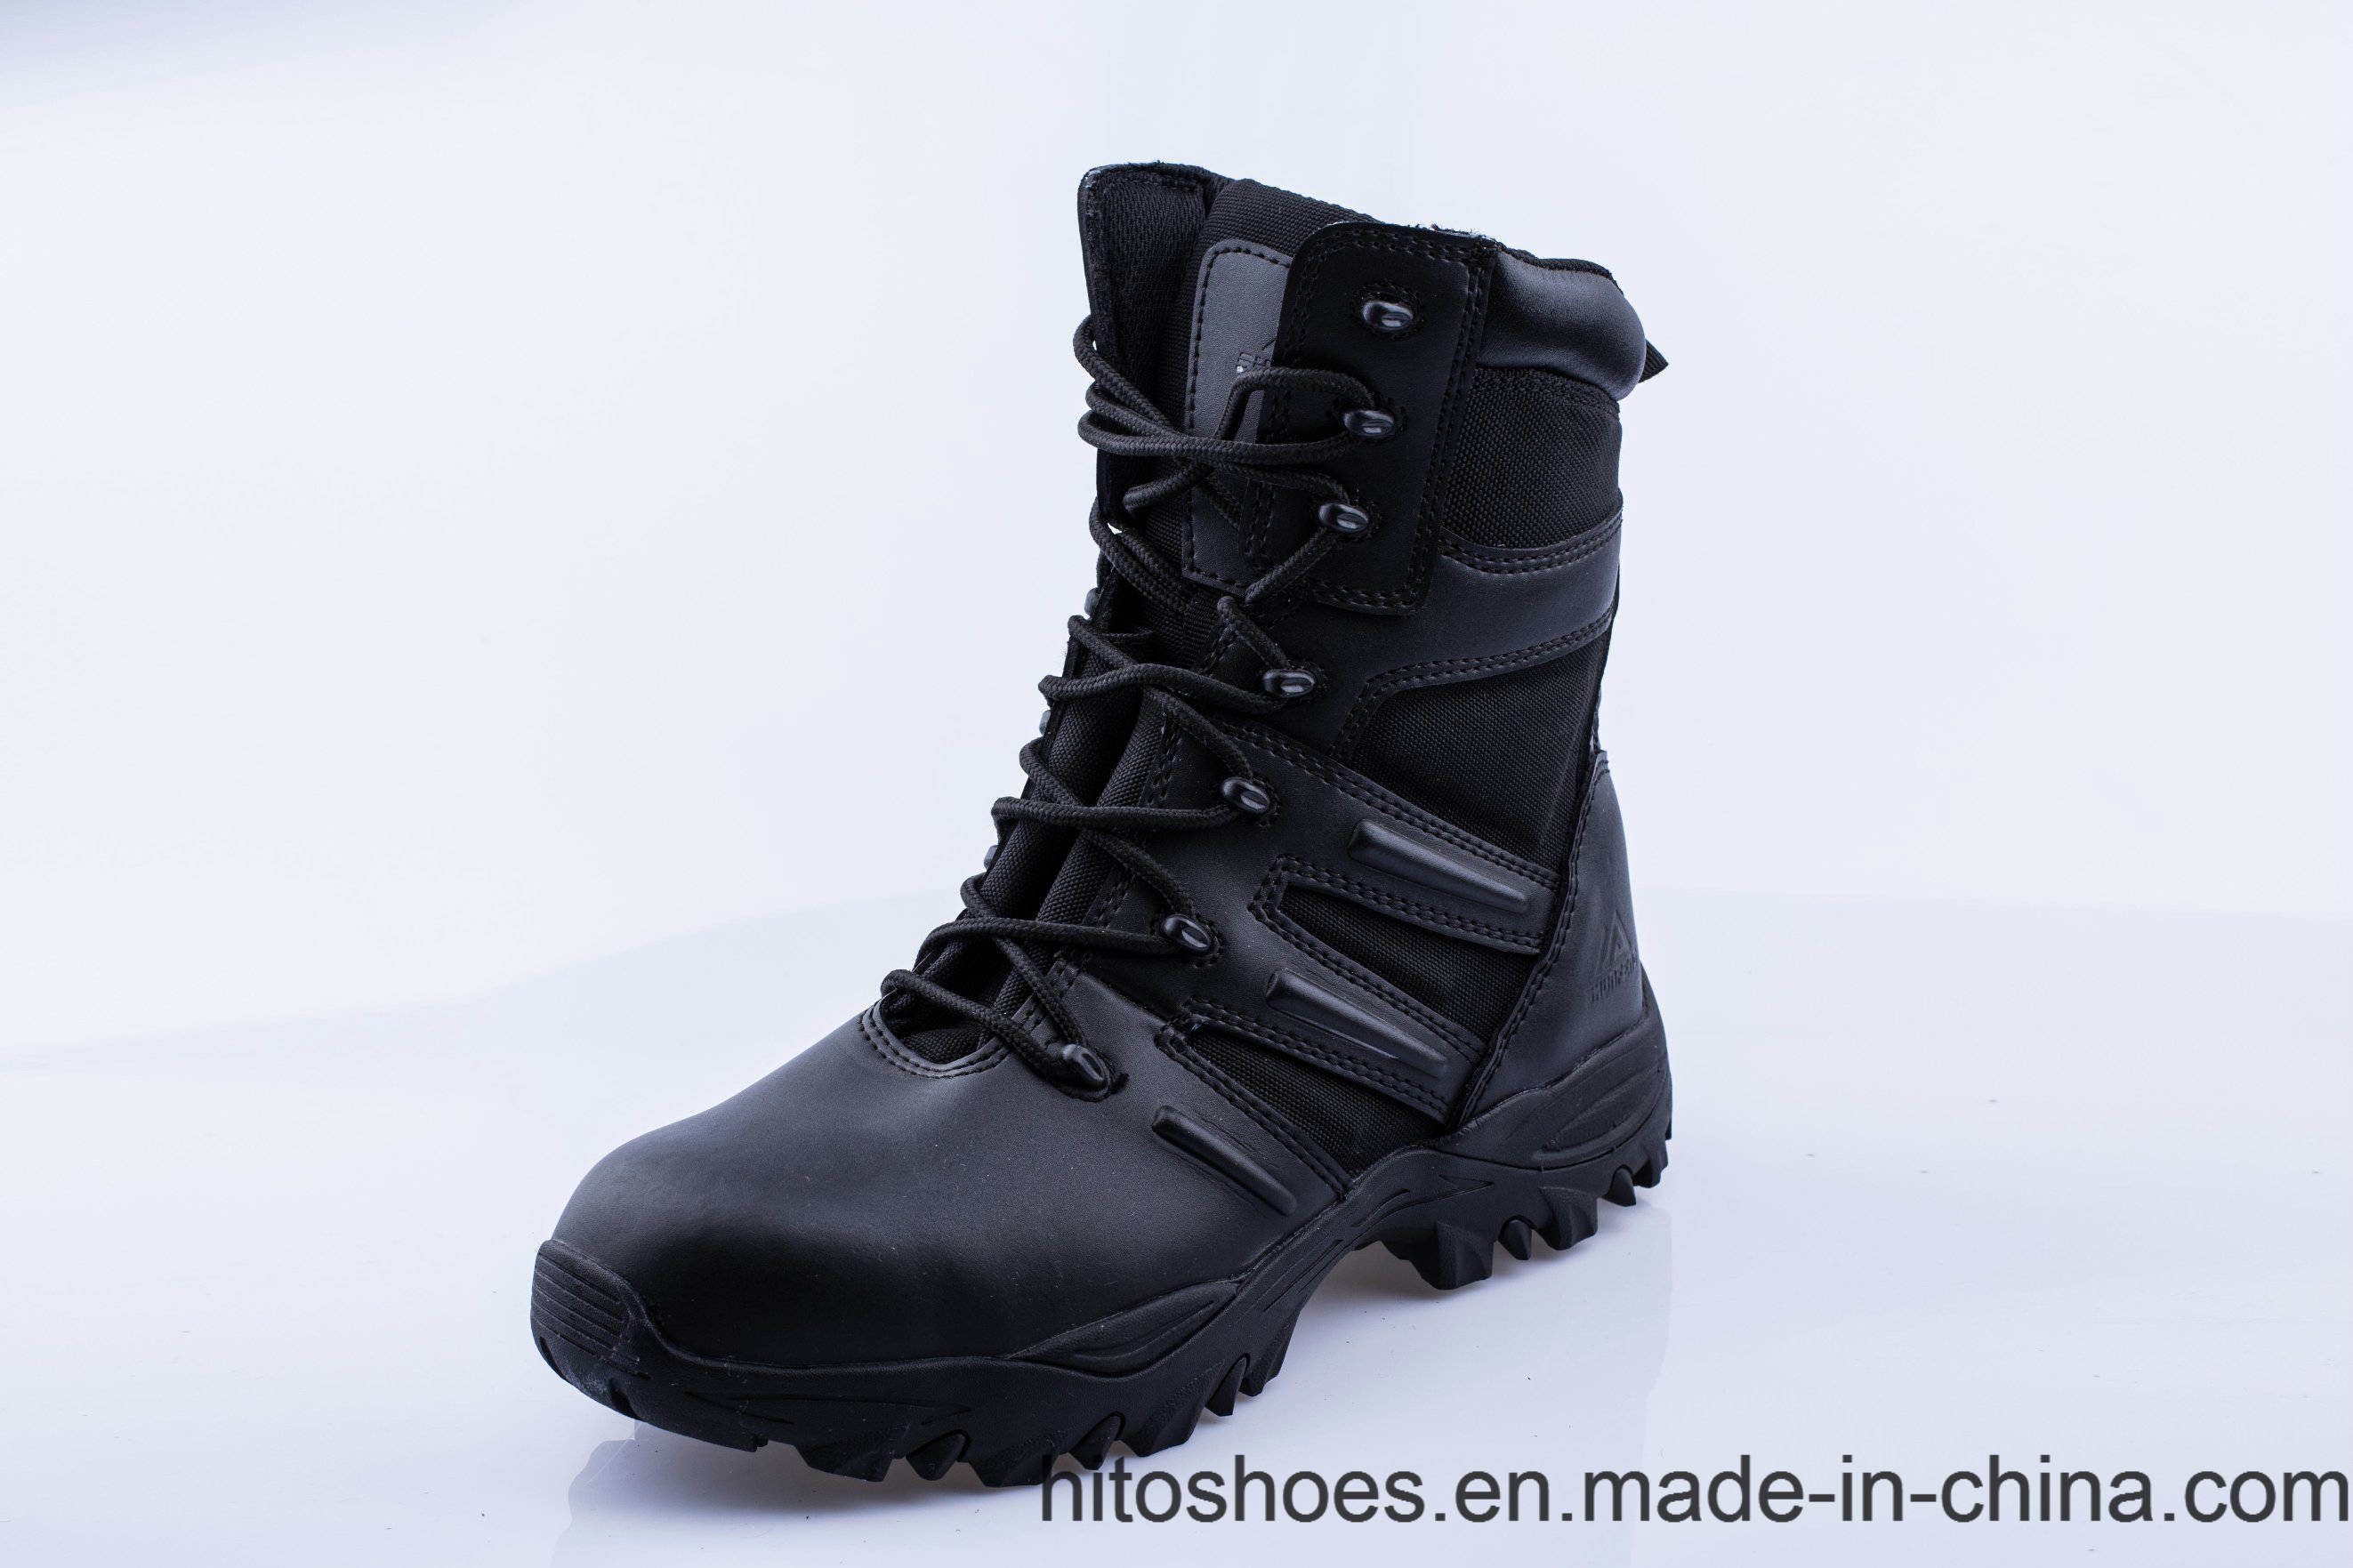 Military Tactical Boots Suede Leather Upper Lighteweight EVA+Rubber Outsole for Military Training